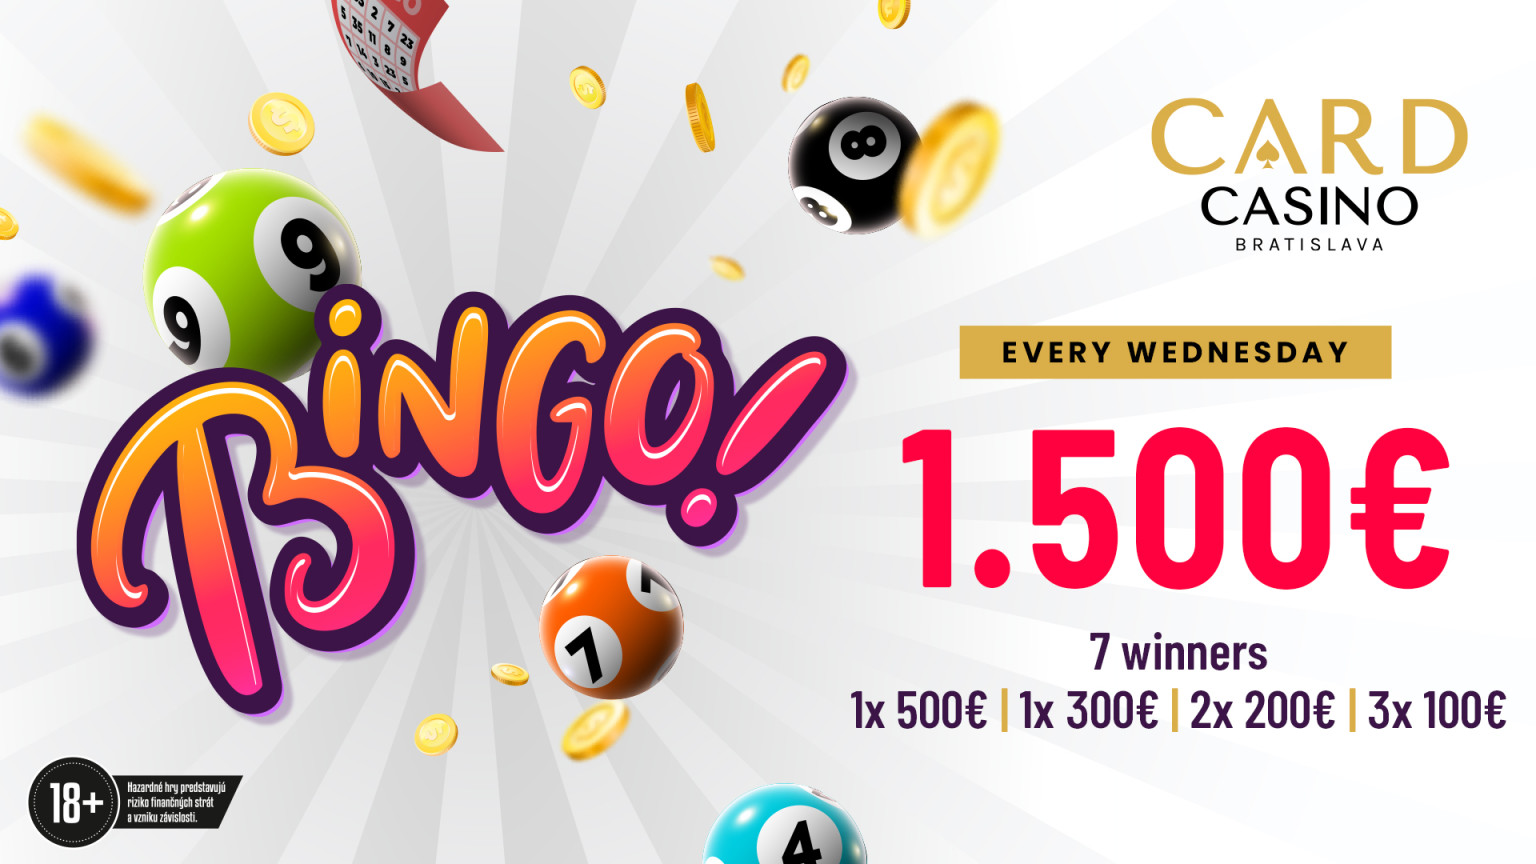 The popular BINGO is back! Have fun and win in your Card